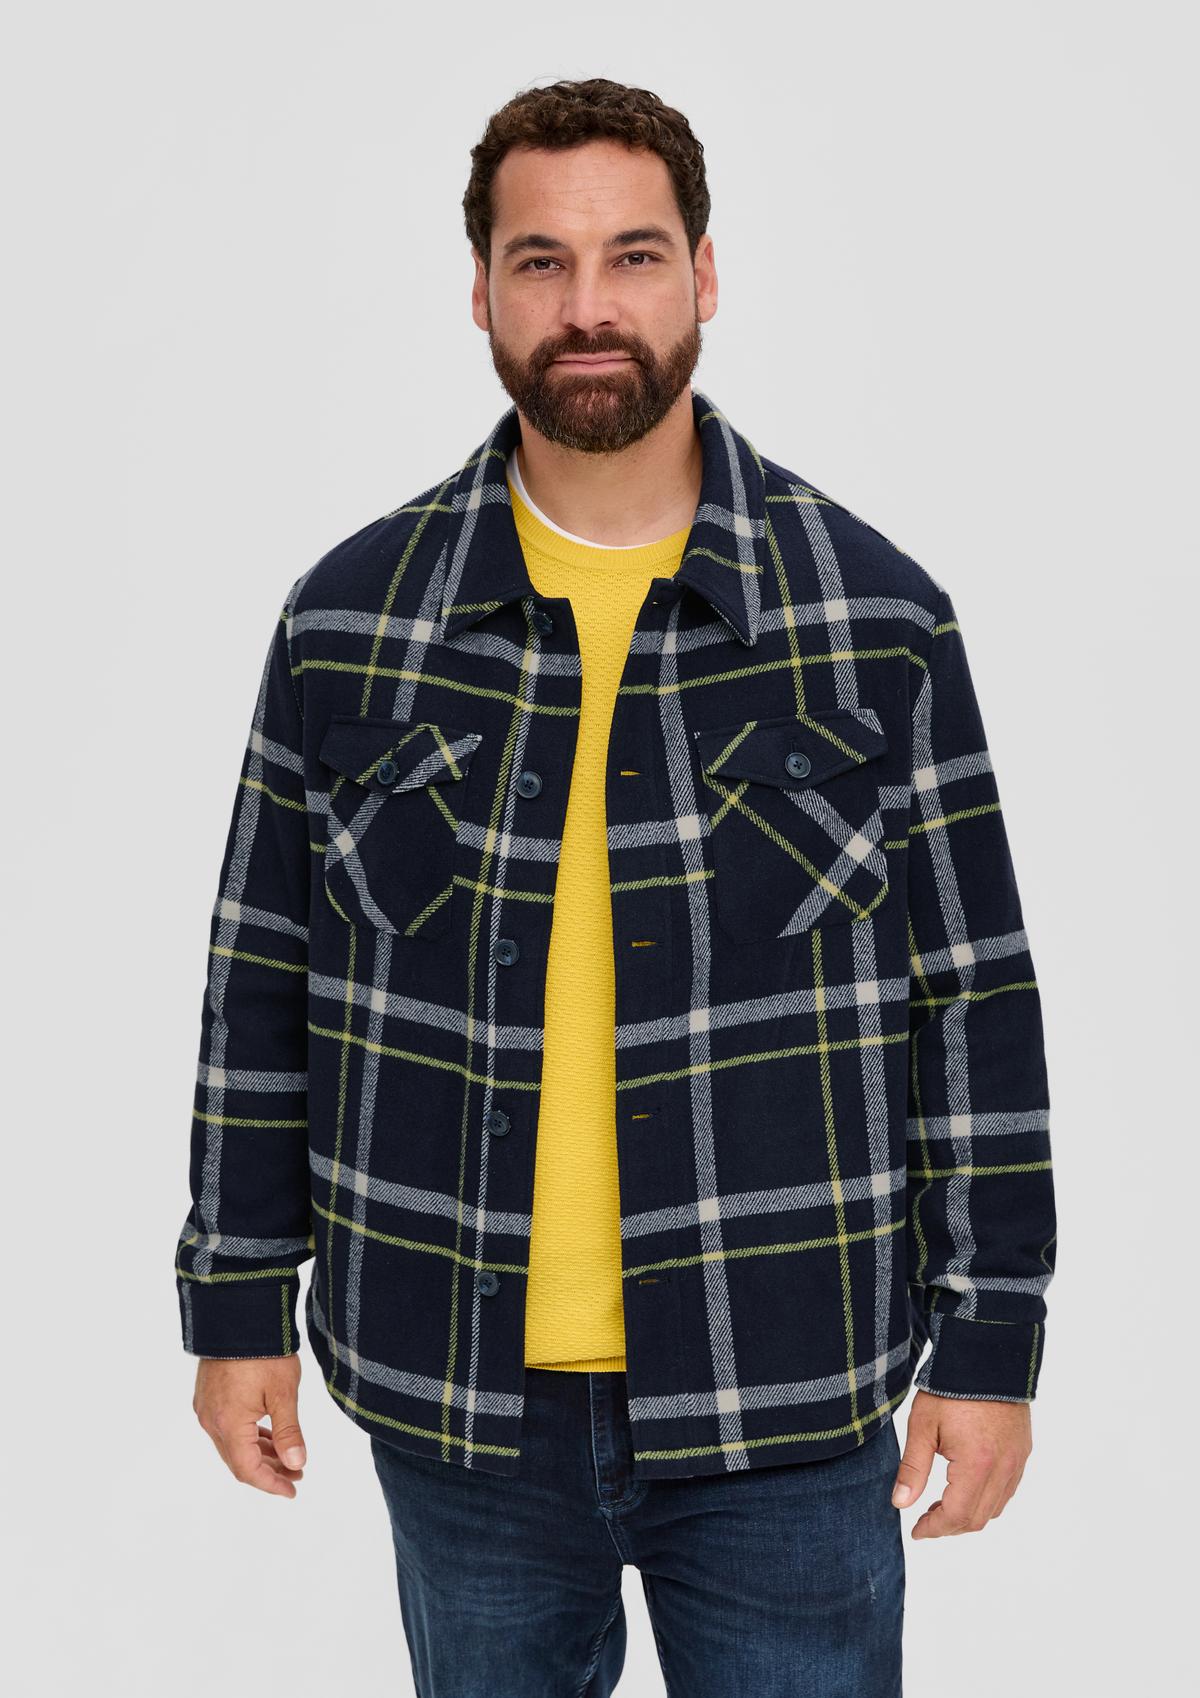 s.Oliver Overshirt in flannel fabric